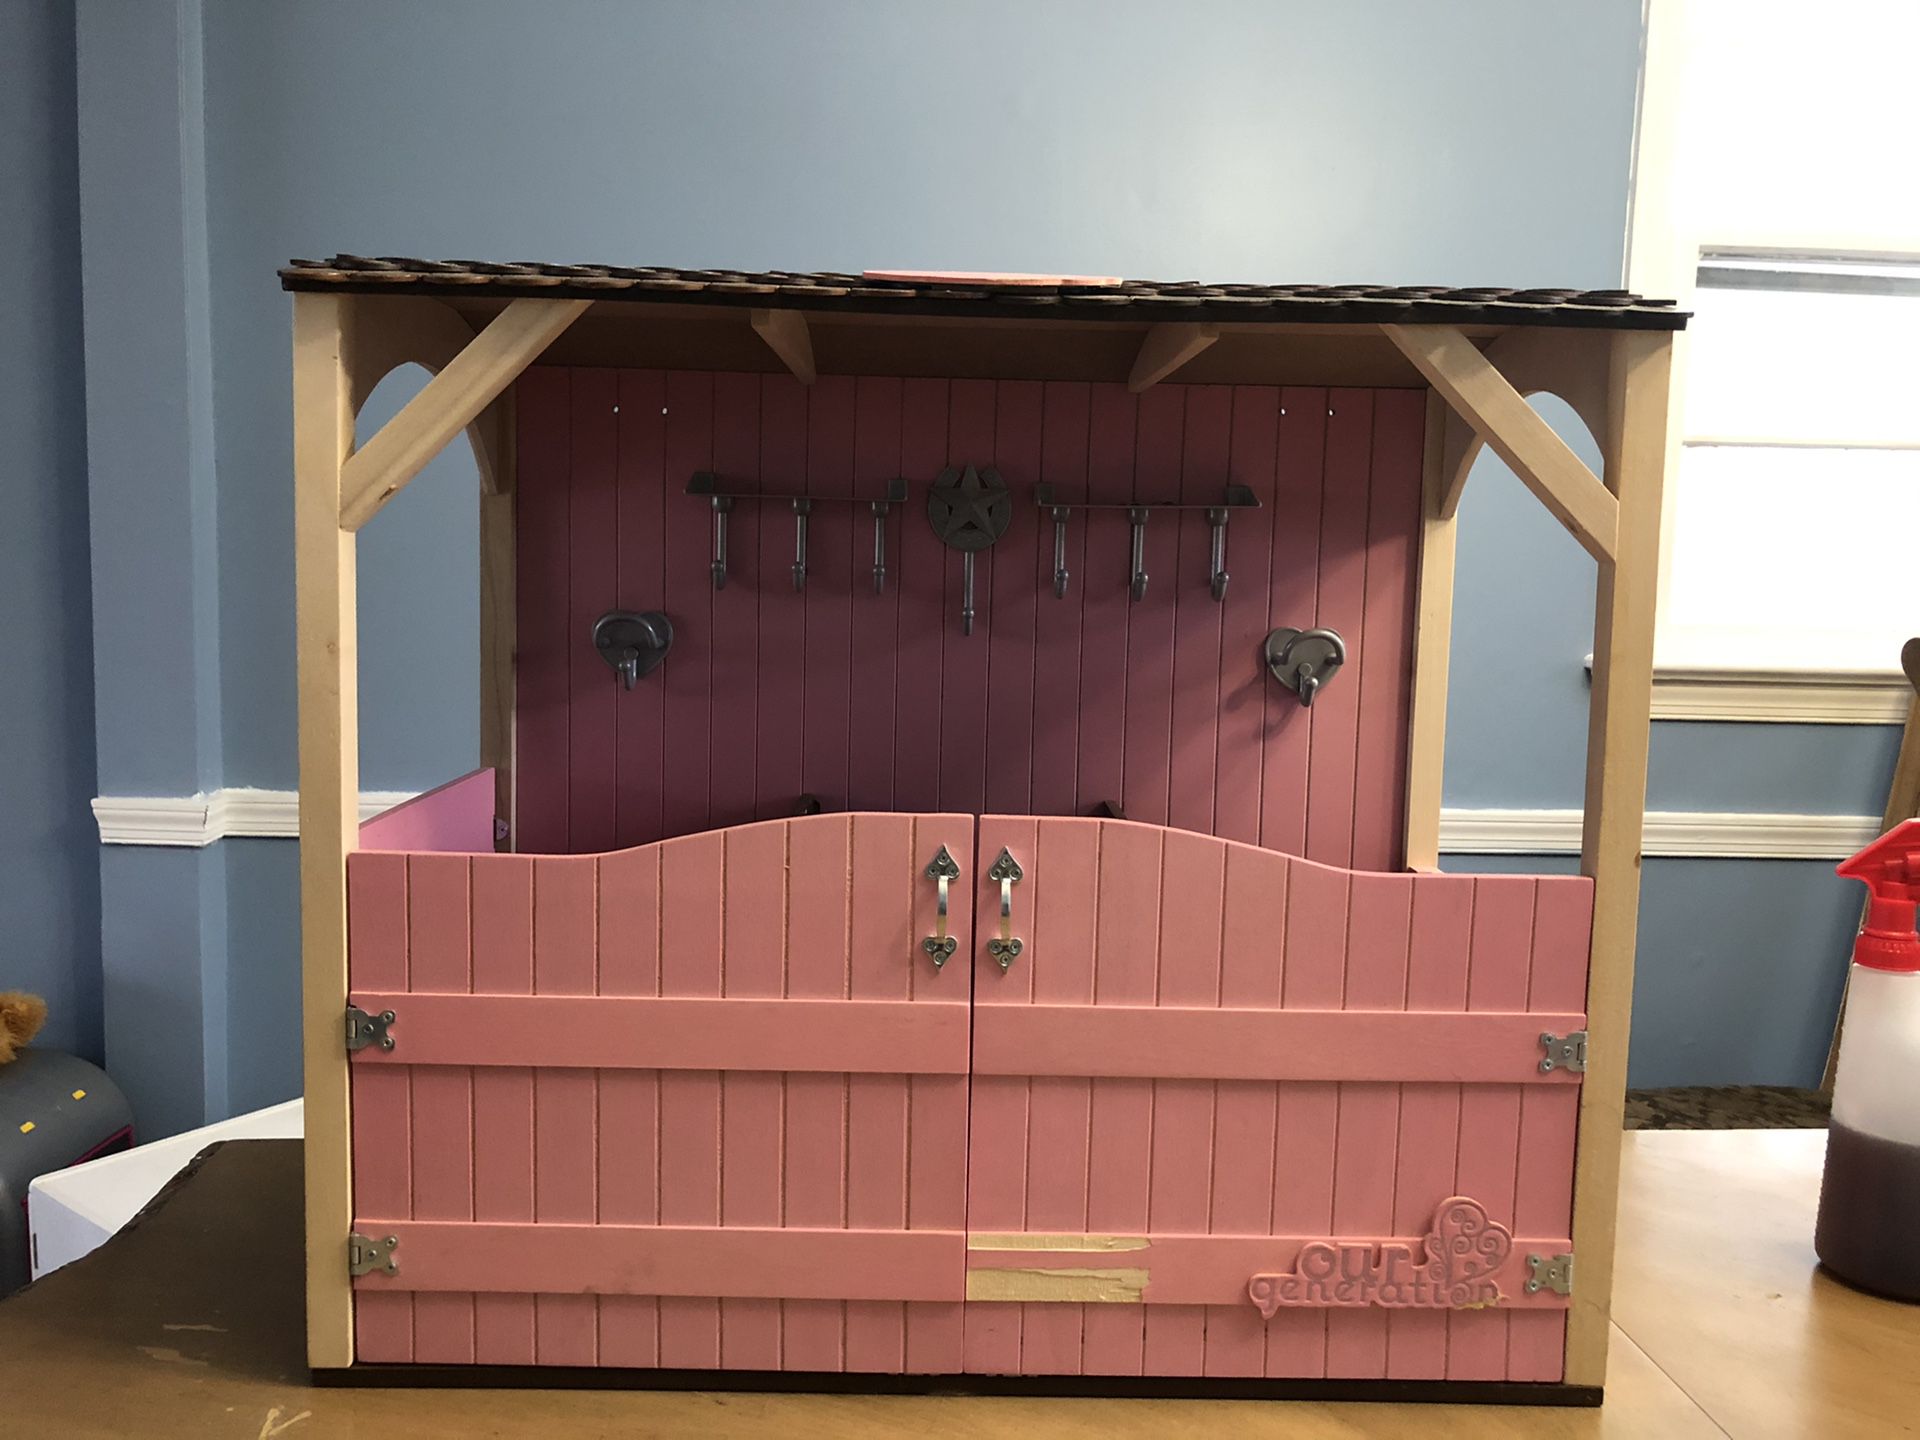 Horse stable. For 18’ dolls.